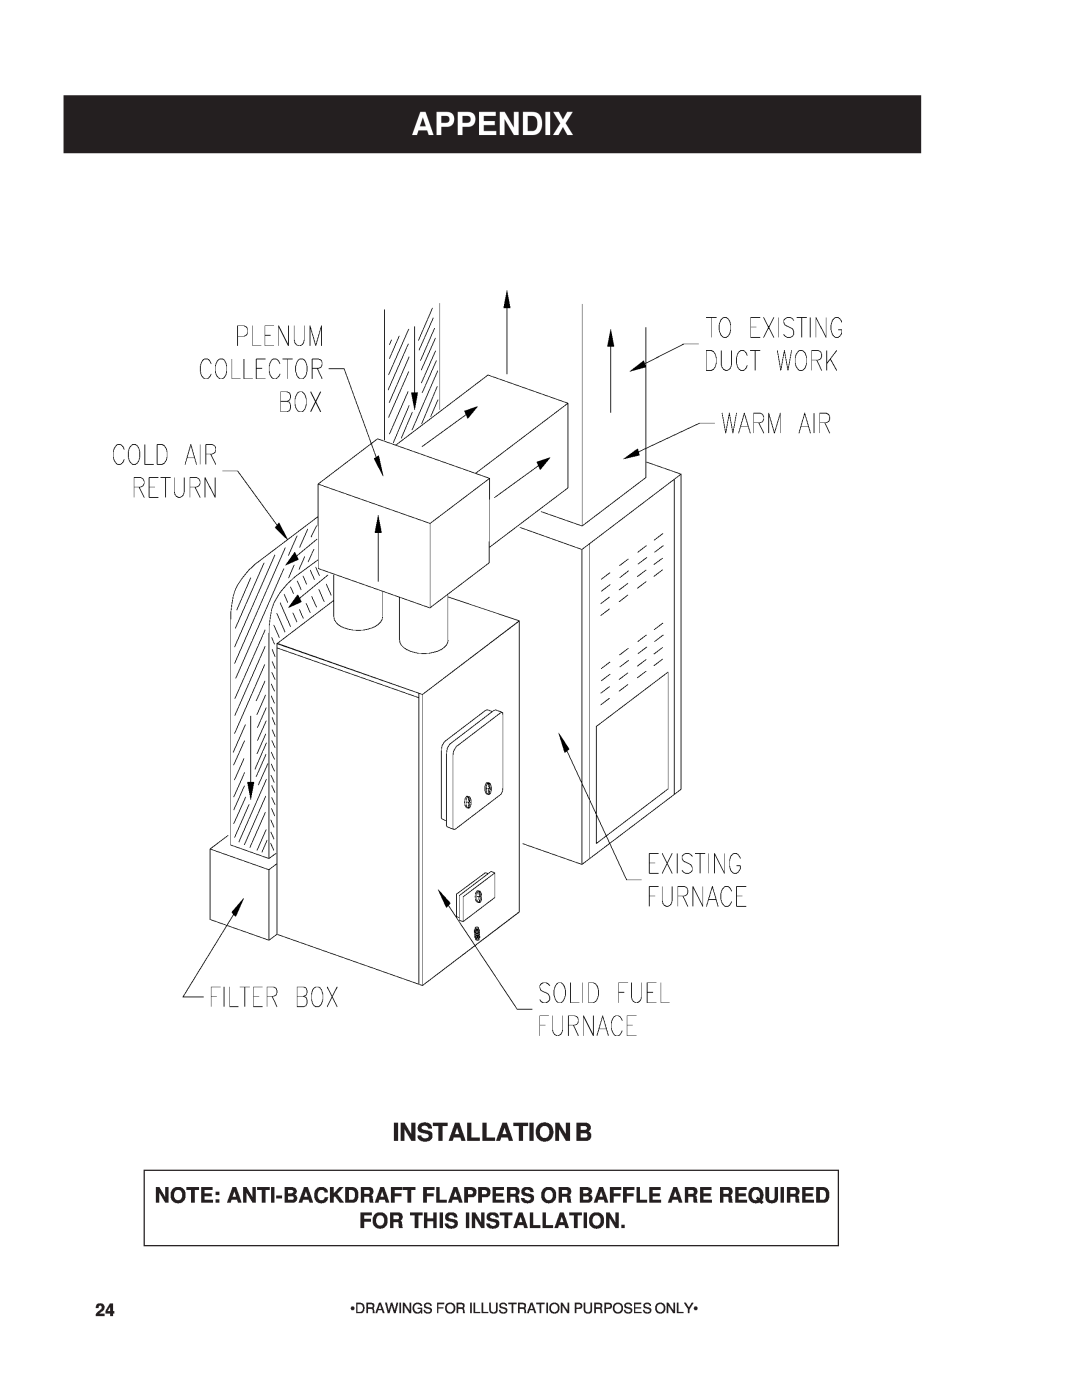 United States Stove 22AF owner manual Installation B, Appendix, Drawings For Illustration Purposes Only 